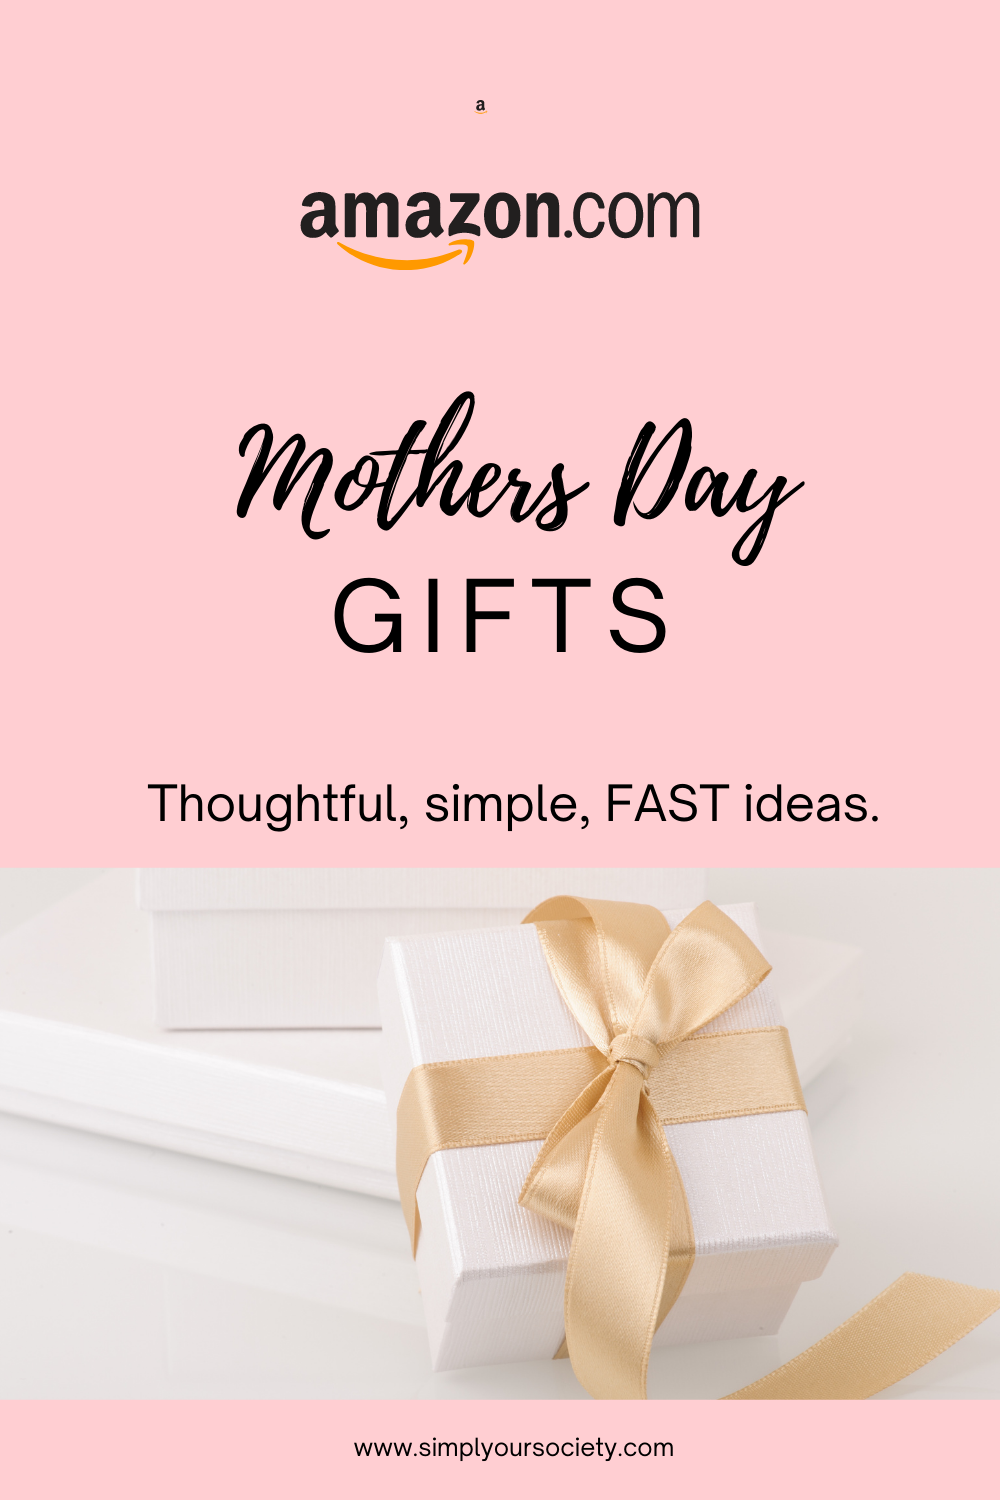 Mothers Day Gifts Amazon 5 Quick Thoughtful Gifts for Mom